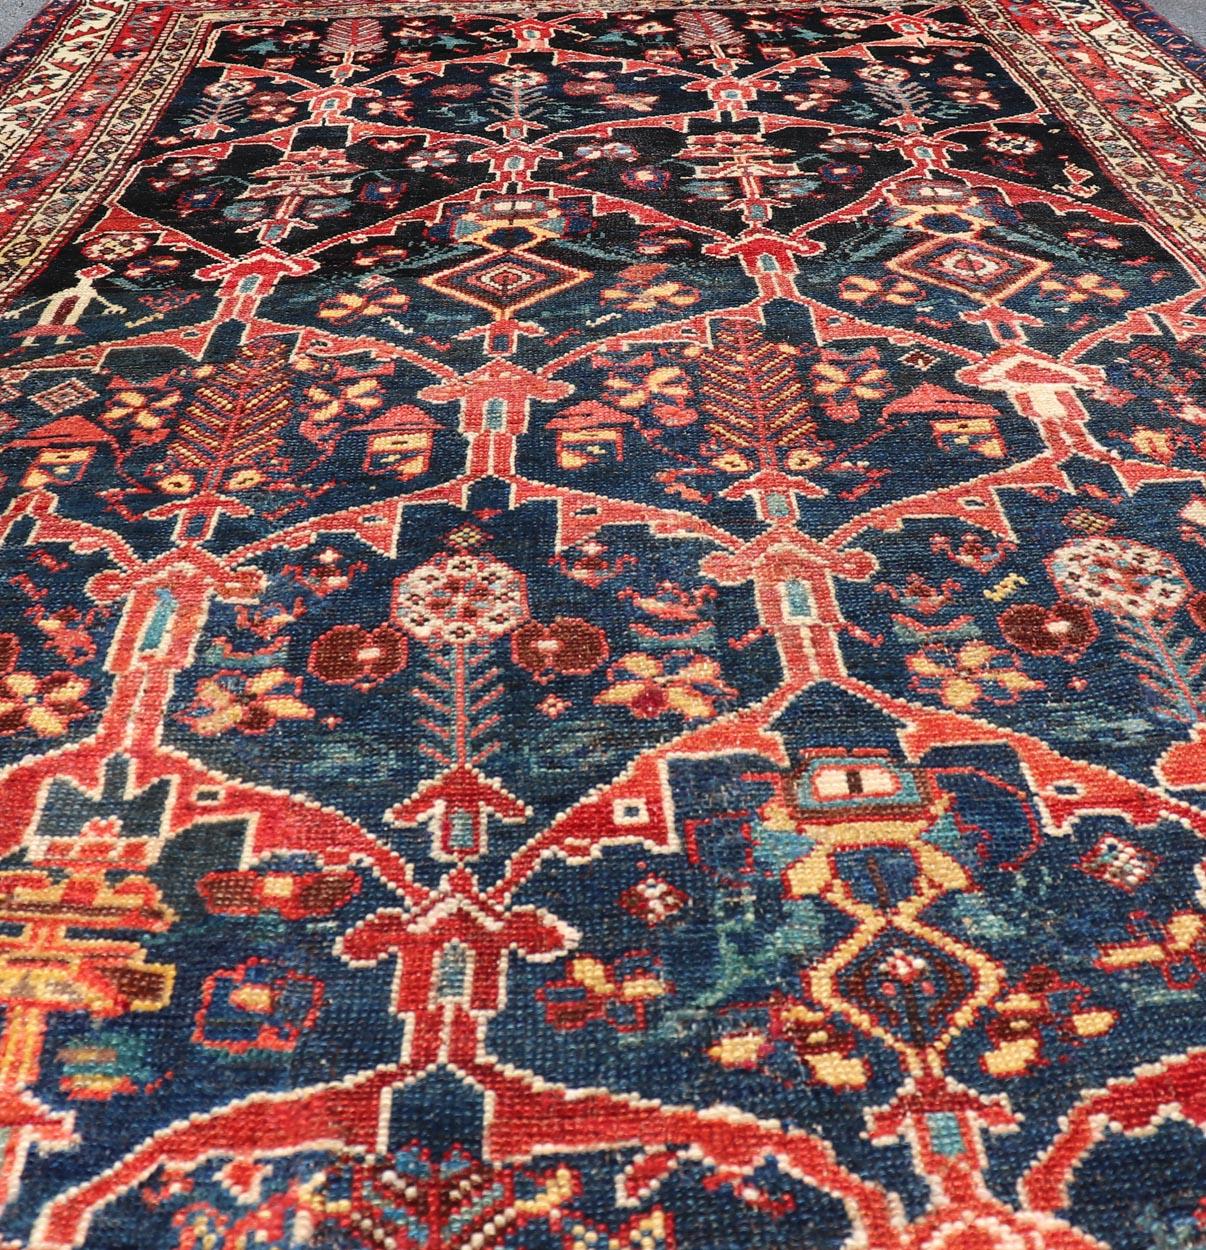 Antique Persian Bakhitari Colorful Rug with All-Over Floral Medallion Design. Keivan Woven Arts: rug EMB-9695-13820; Antique Persian Rug, Antique Persian  Antique Persian Floral Rug, Antique Bakhtiari. 
Measures: 4'8 x 8'4 
This woven art features a